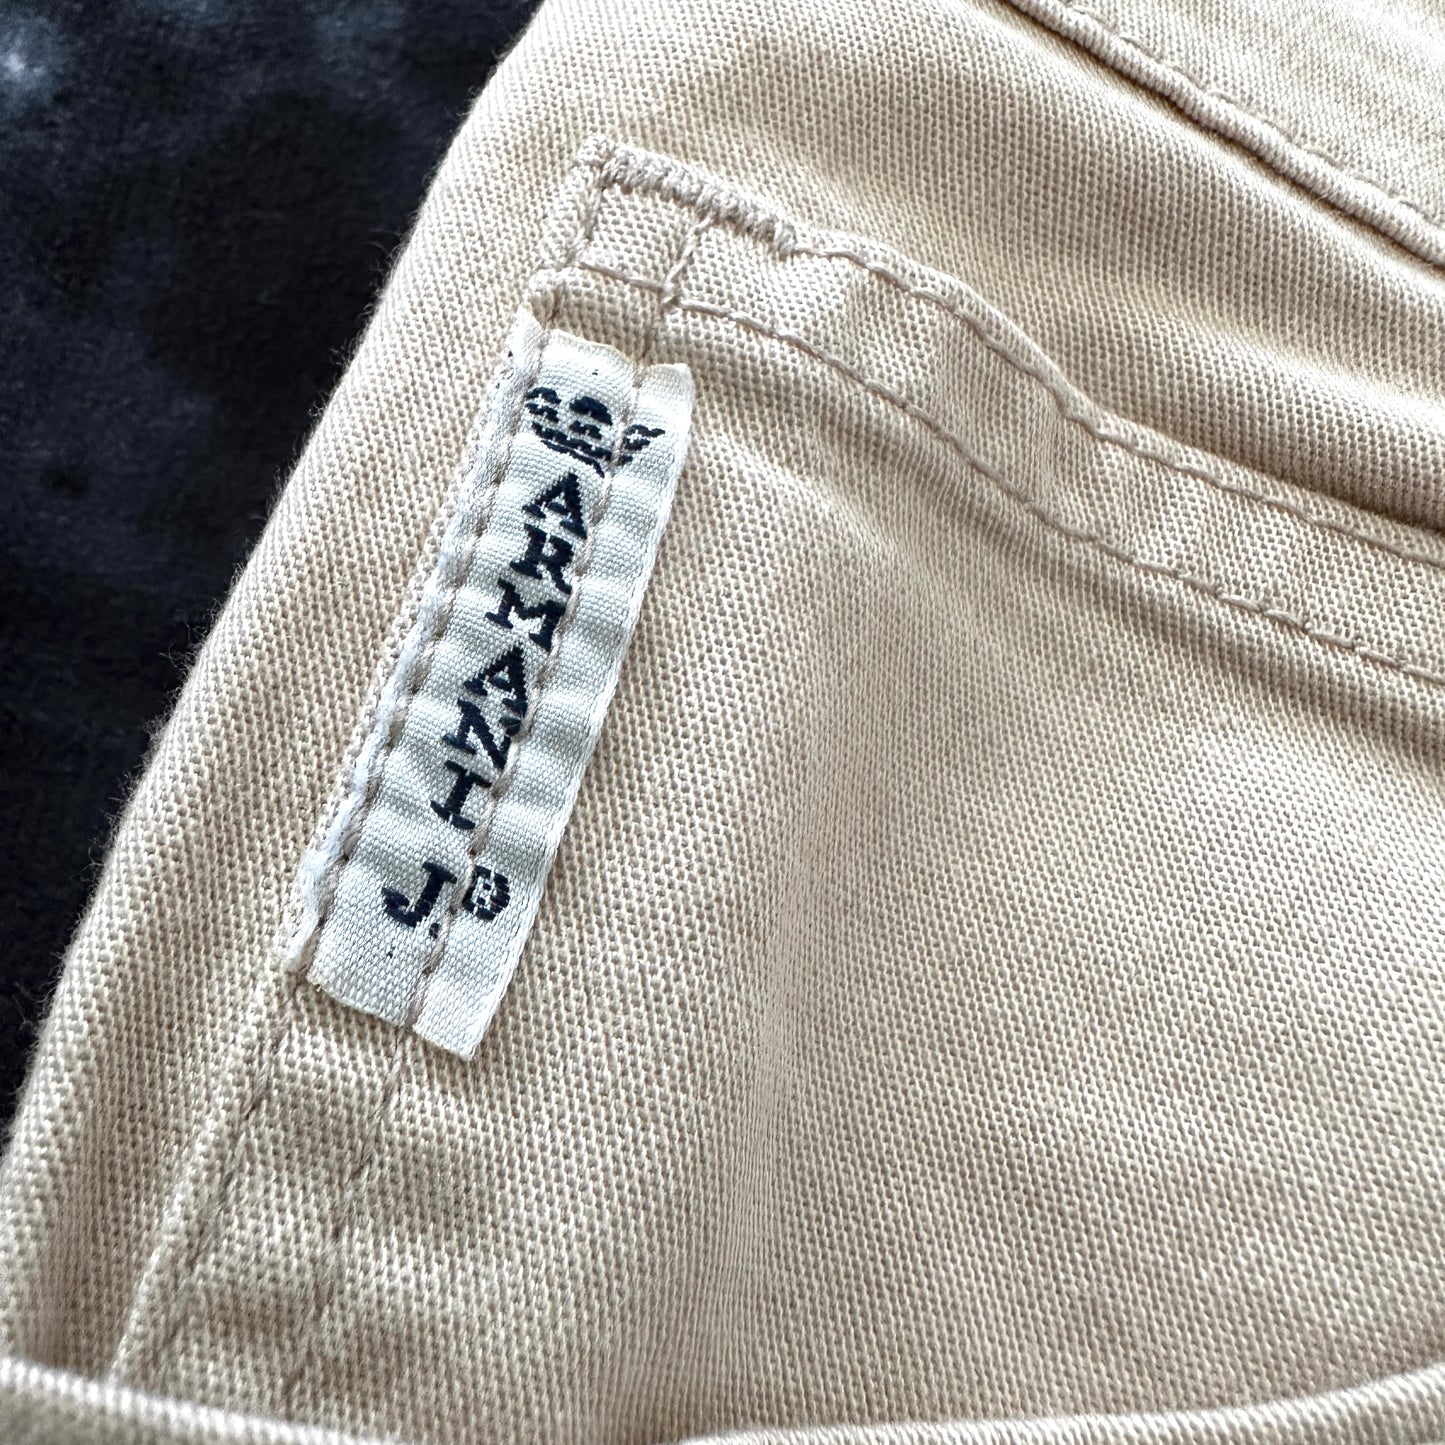 Armani Jeans Vintage 80s Womens Pants - 27 - Made in Italy